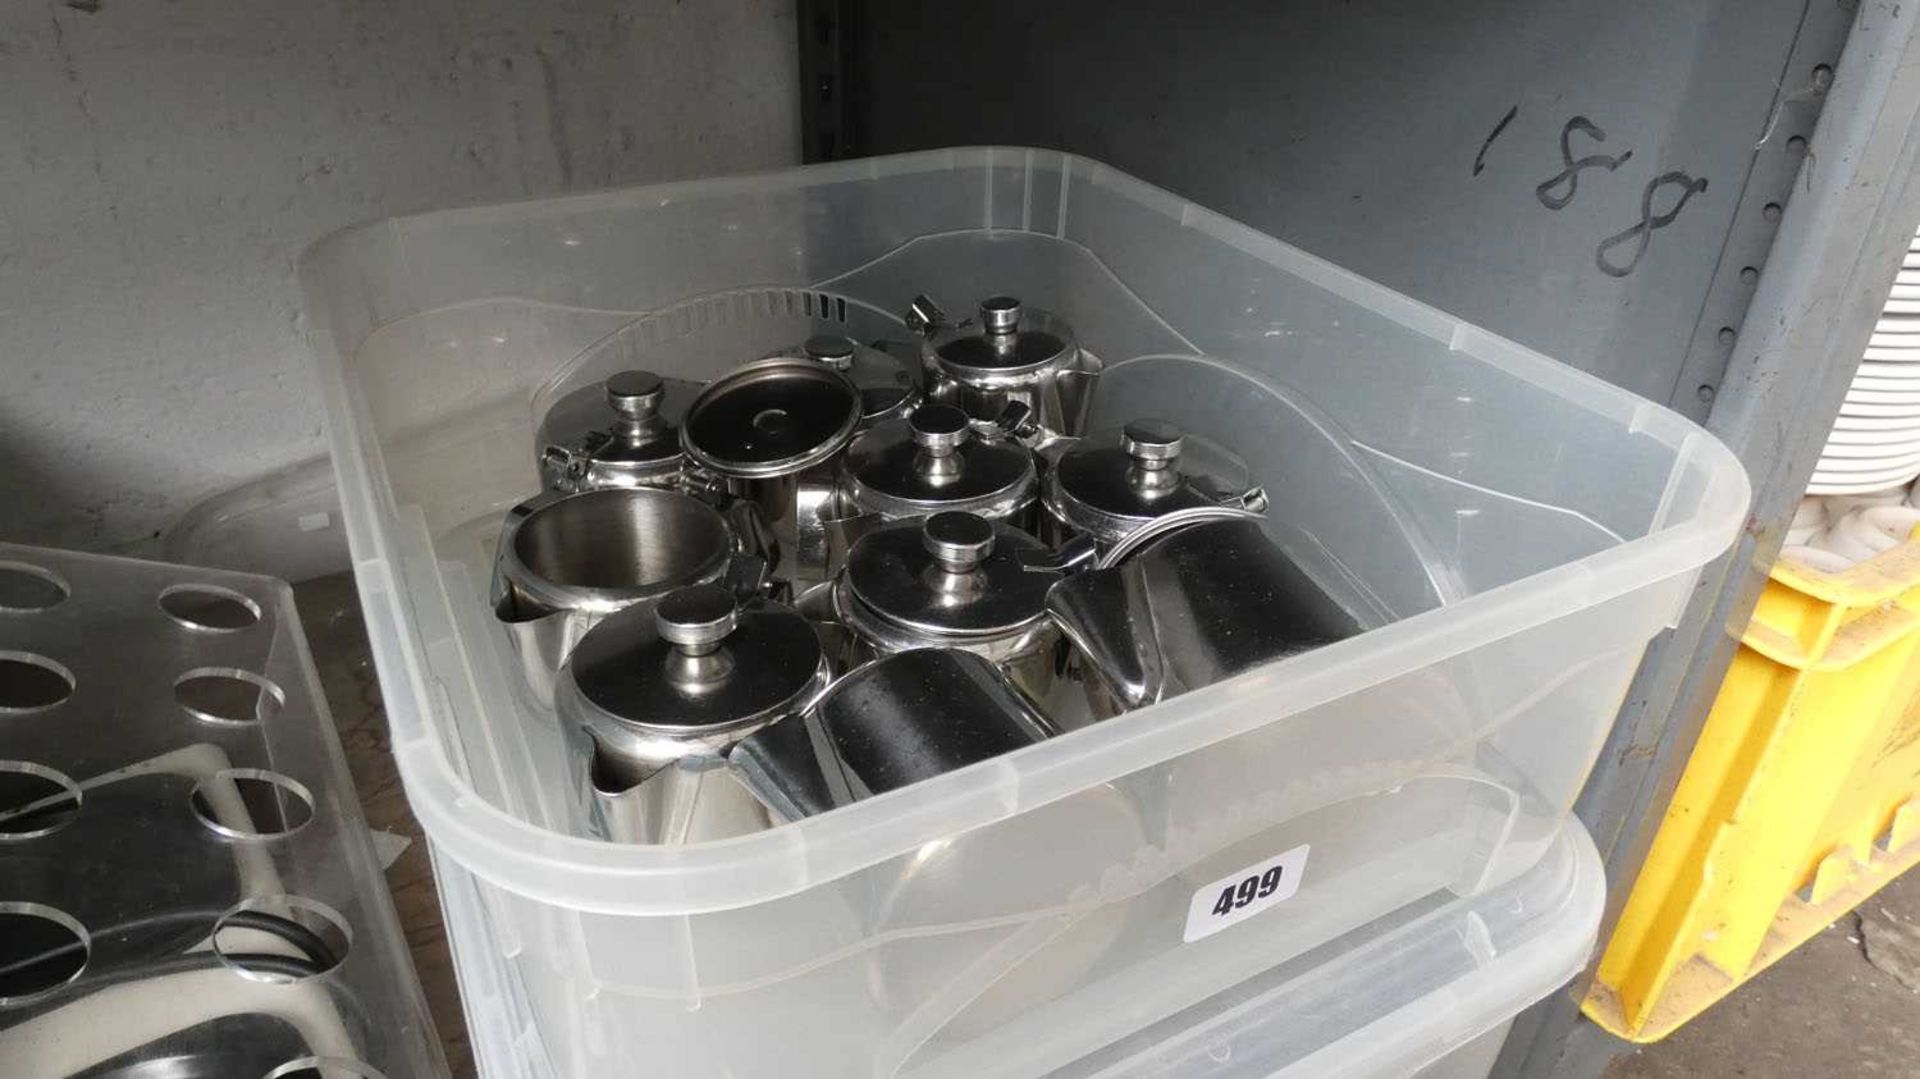 Tray of stainless steel teapots